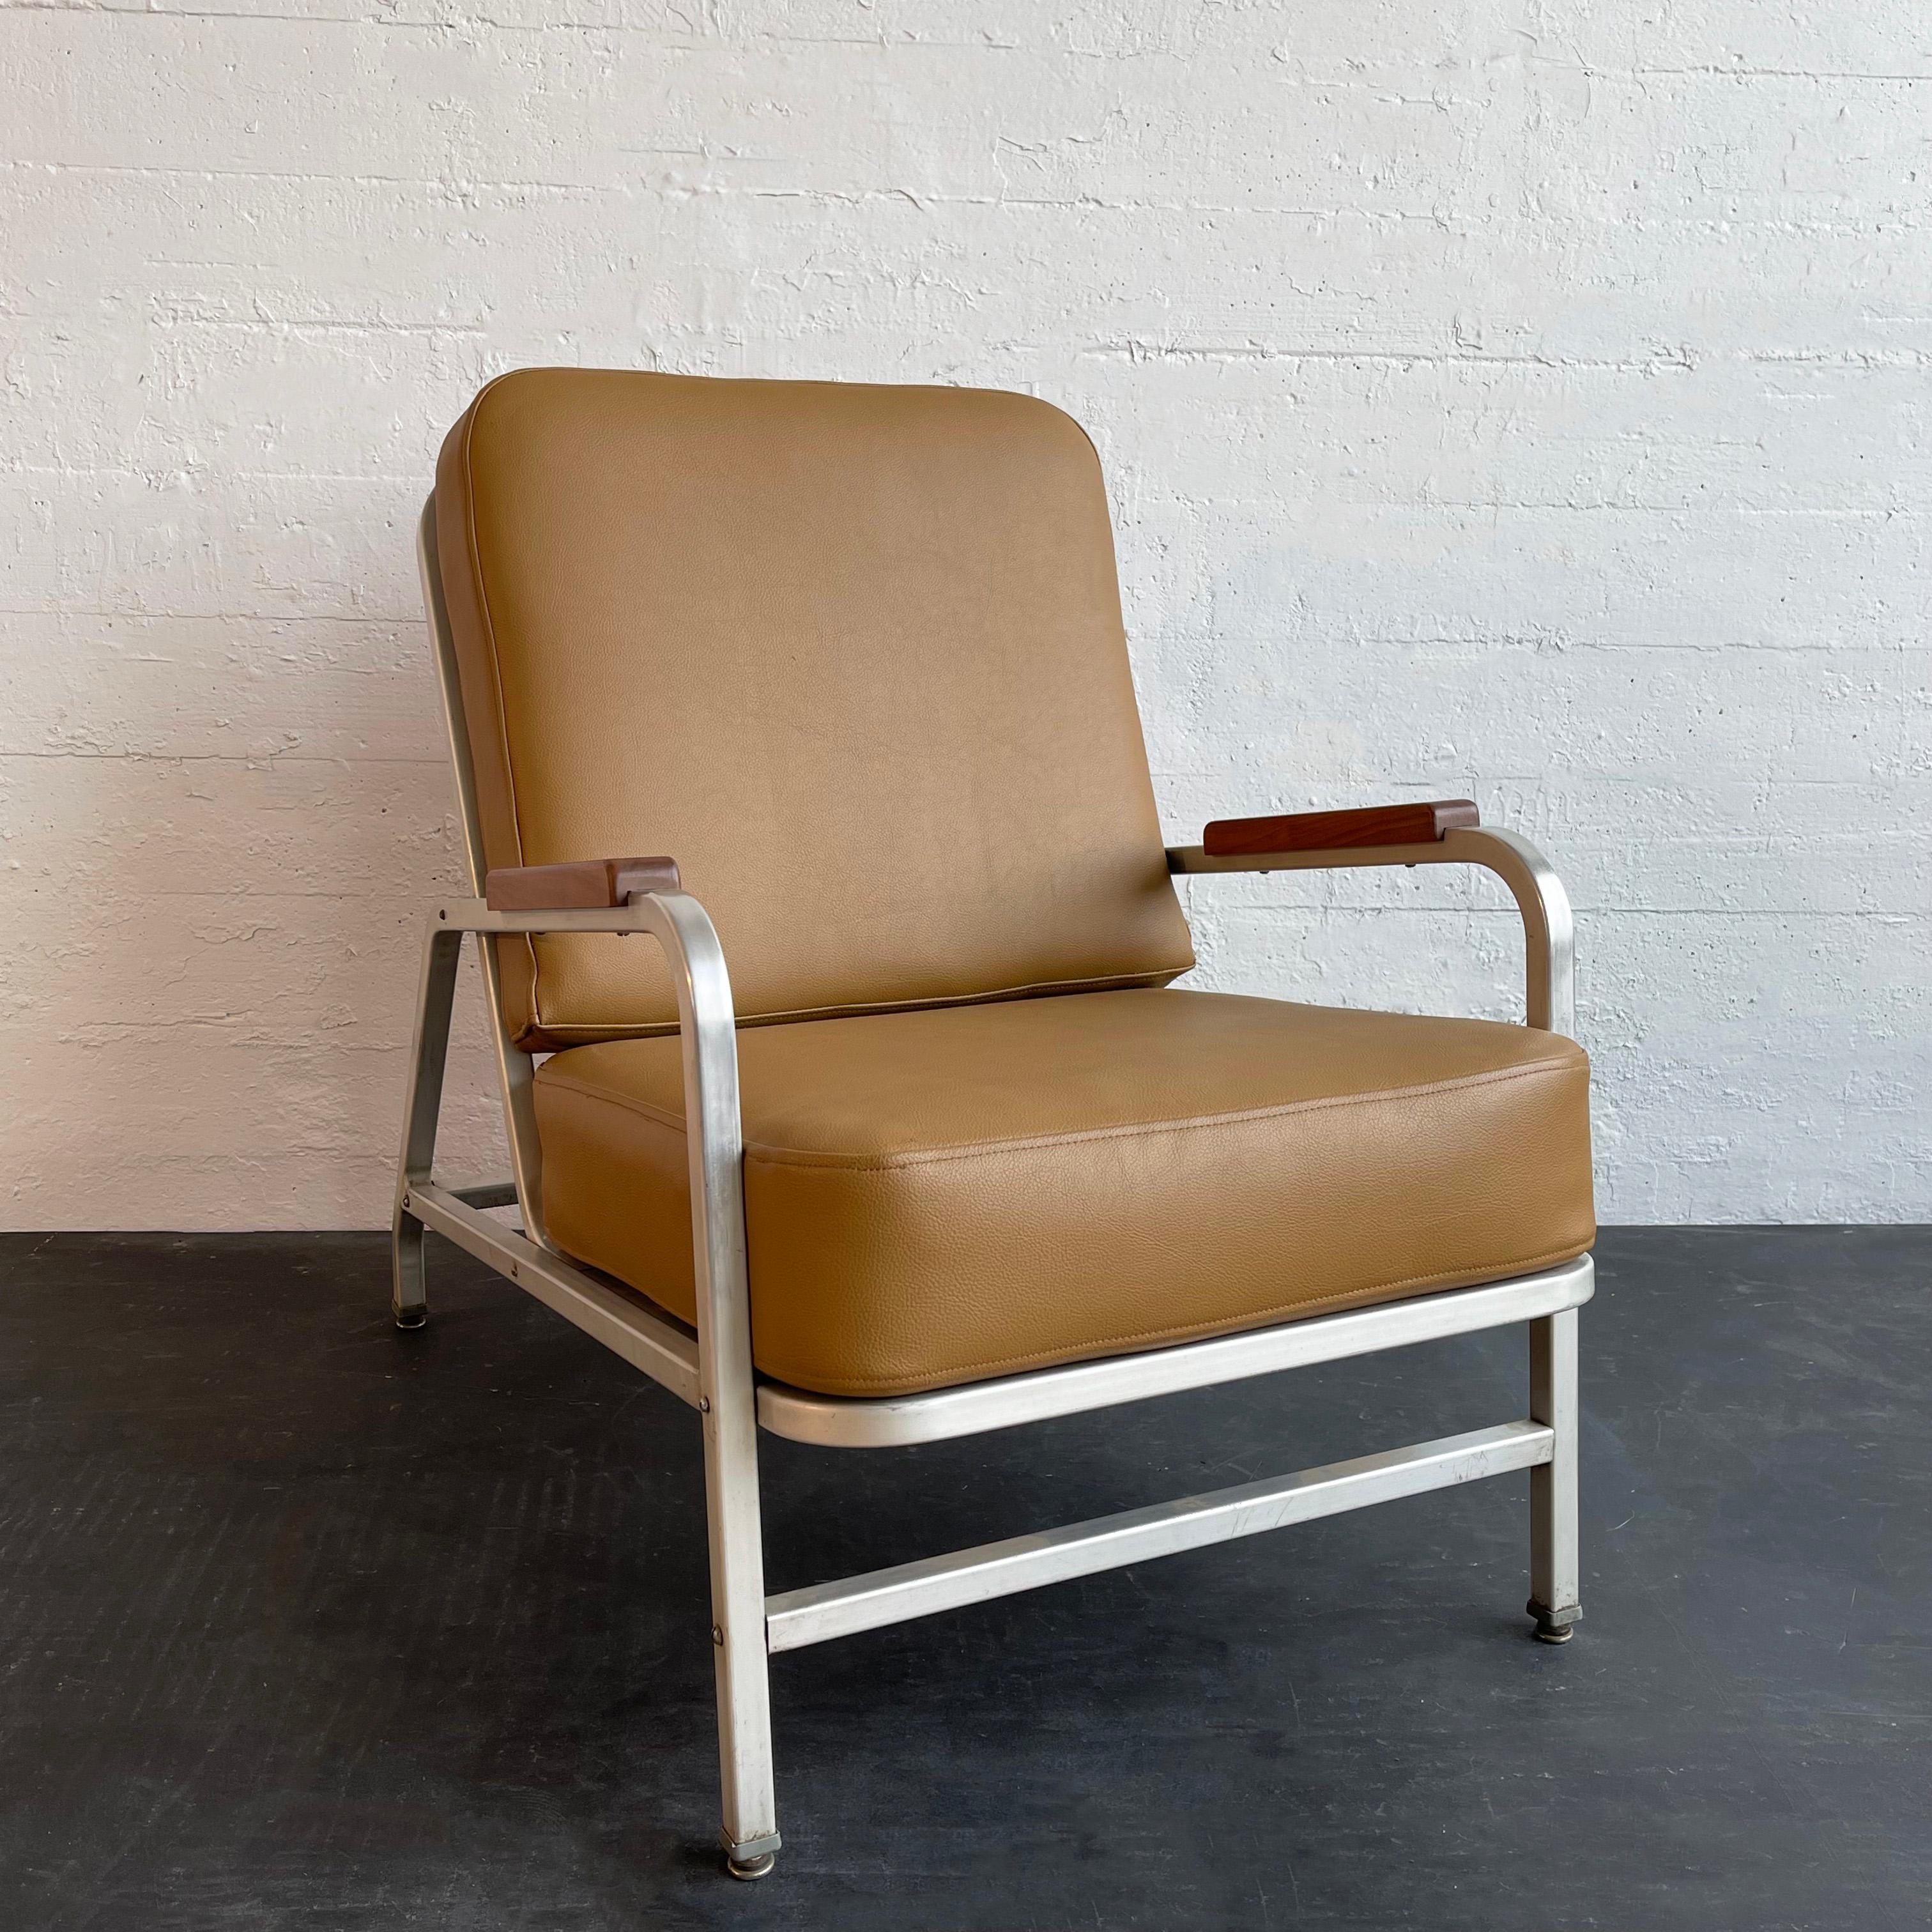 Machine-age, mid-century, lounge armchair circa 1940's features a sleek, light weight, aluminum frame with maple armrests and newly upholstered seat and back cushions in camel tan textured vinyl. 